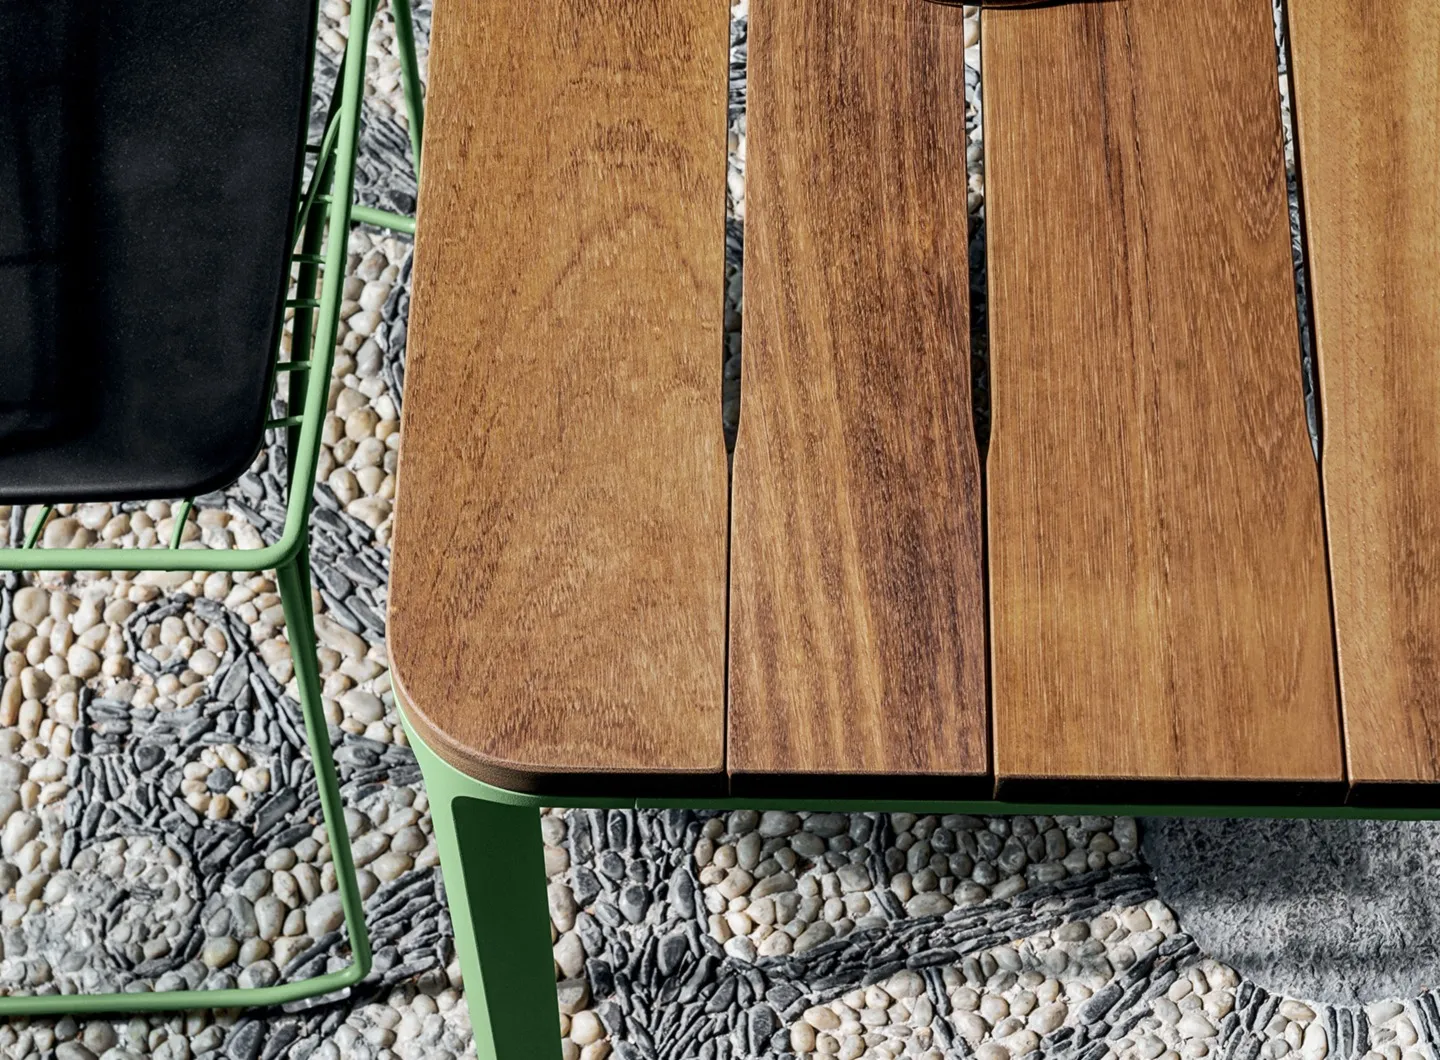 Slim outdoor dining table with iroko slats and Keyah chair in embossed green.